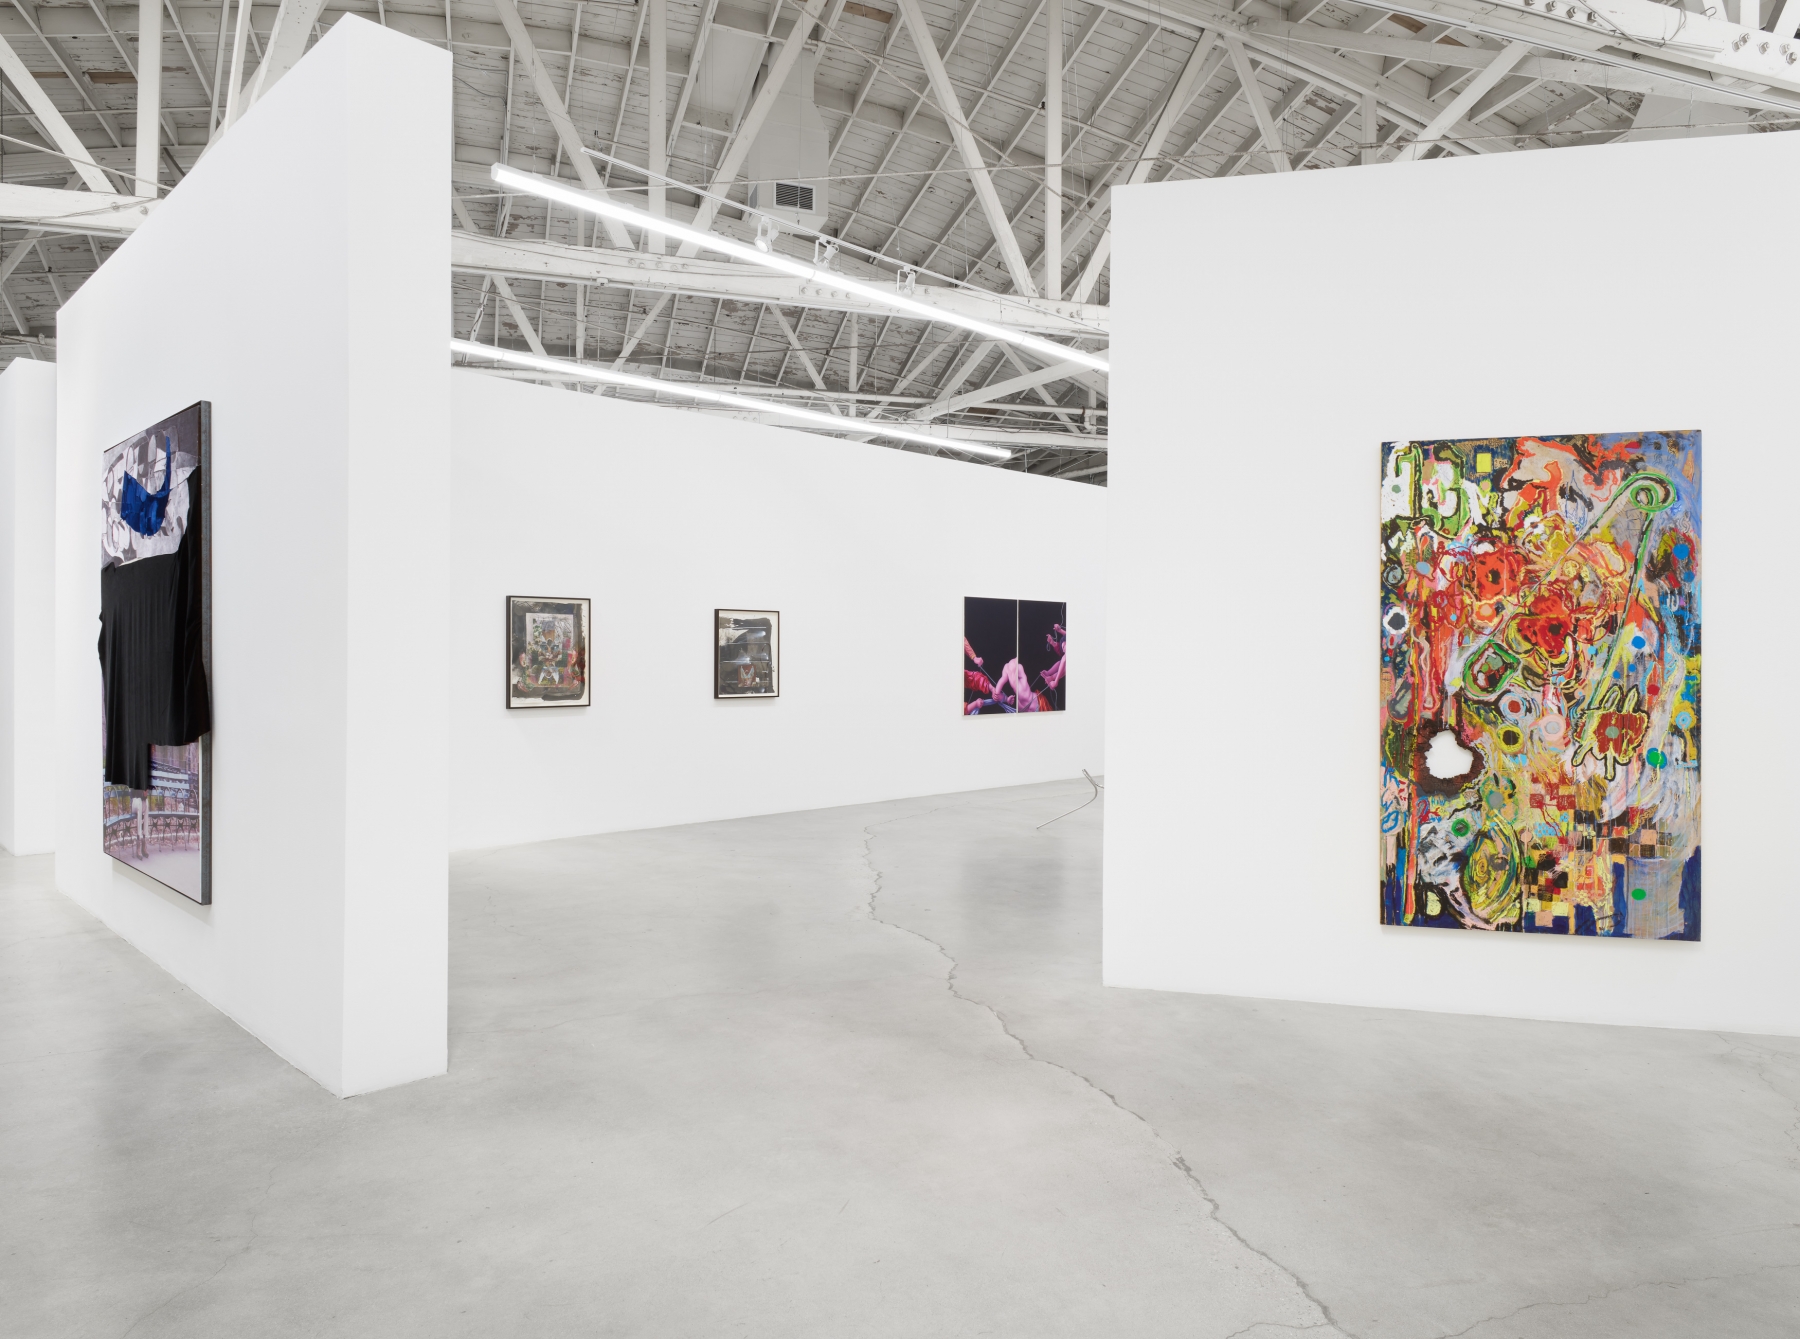 Installation view of Majeure Force, Part Two, featuring works by Rose Marcus, Kandis Williams, Jesse Mockrin, and JPW3.